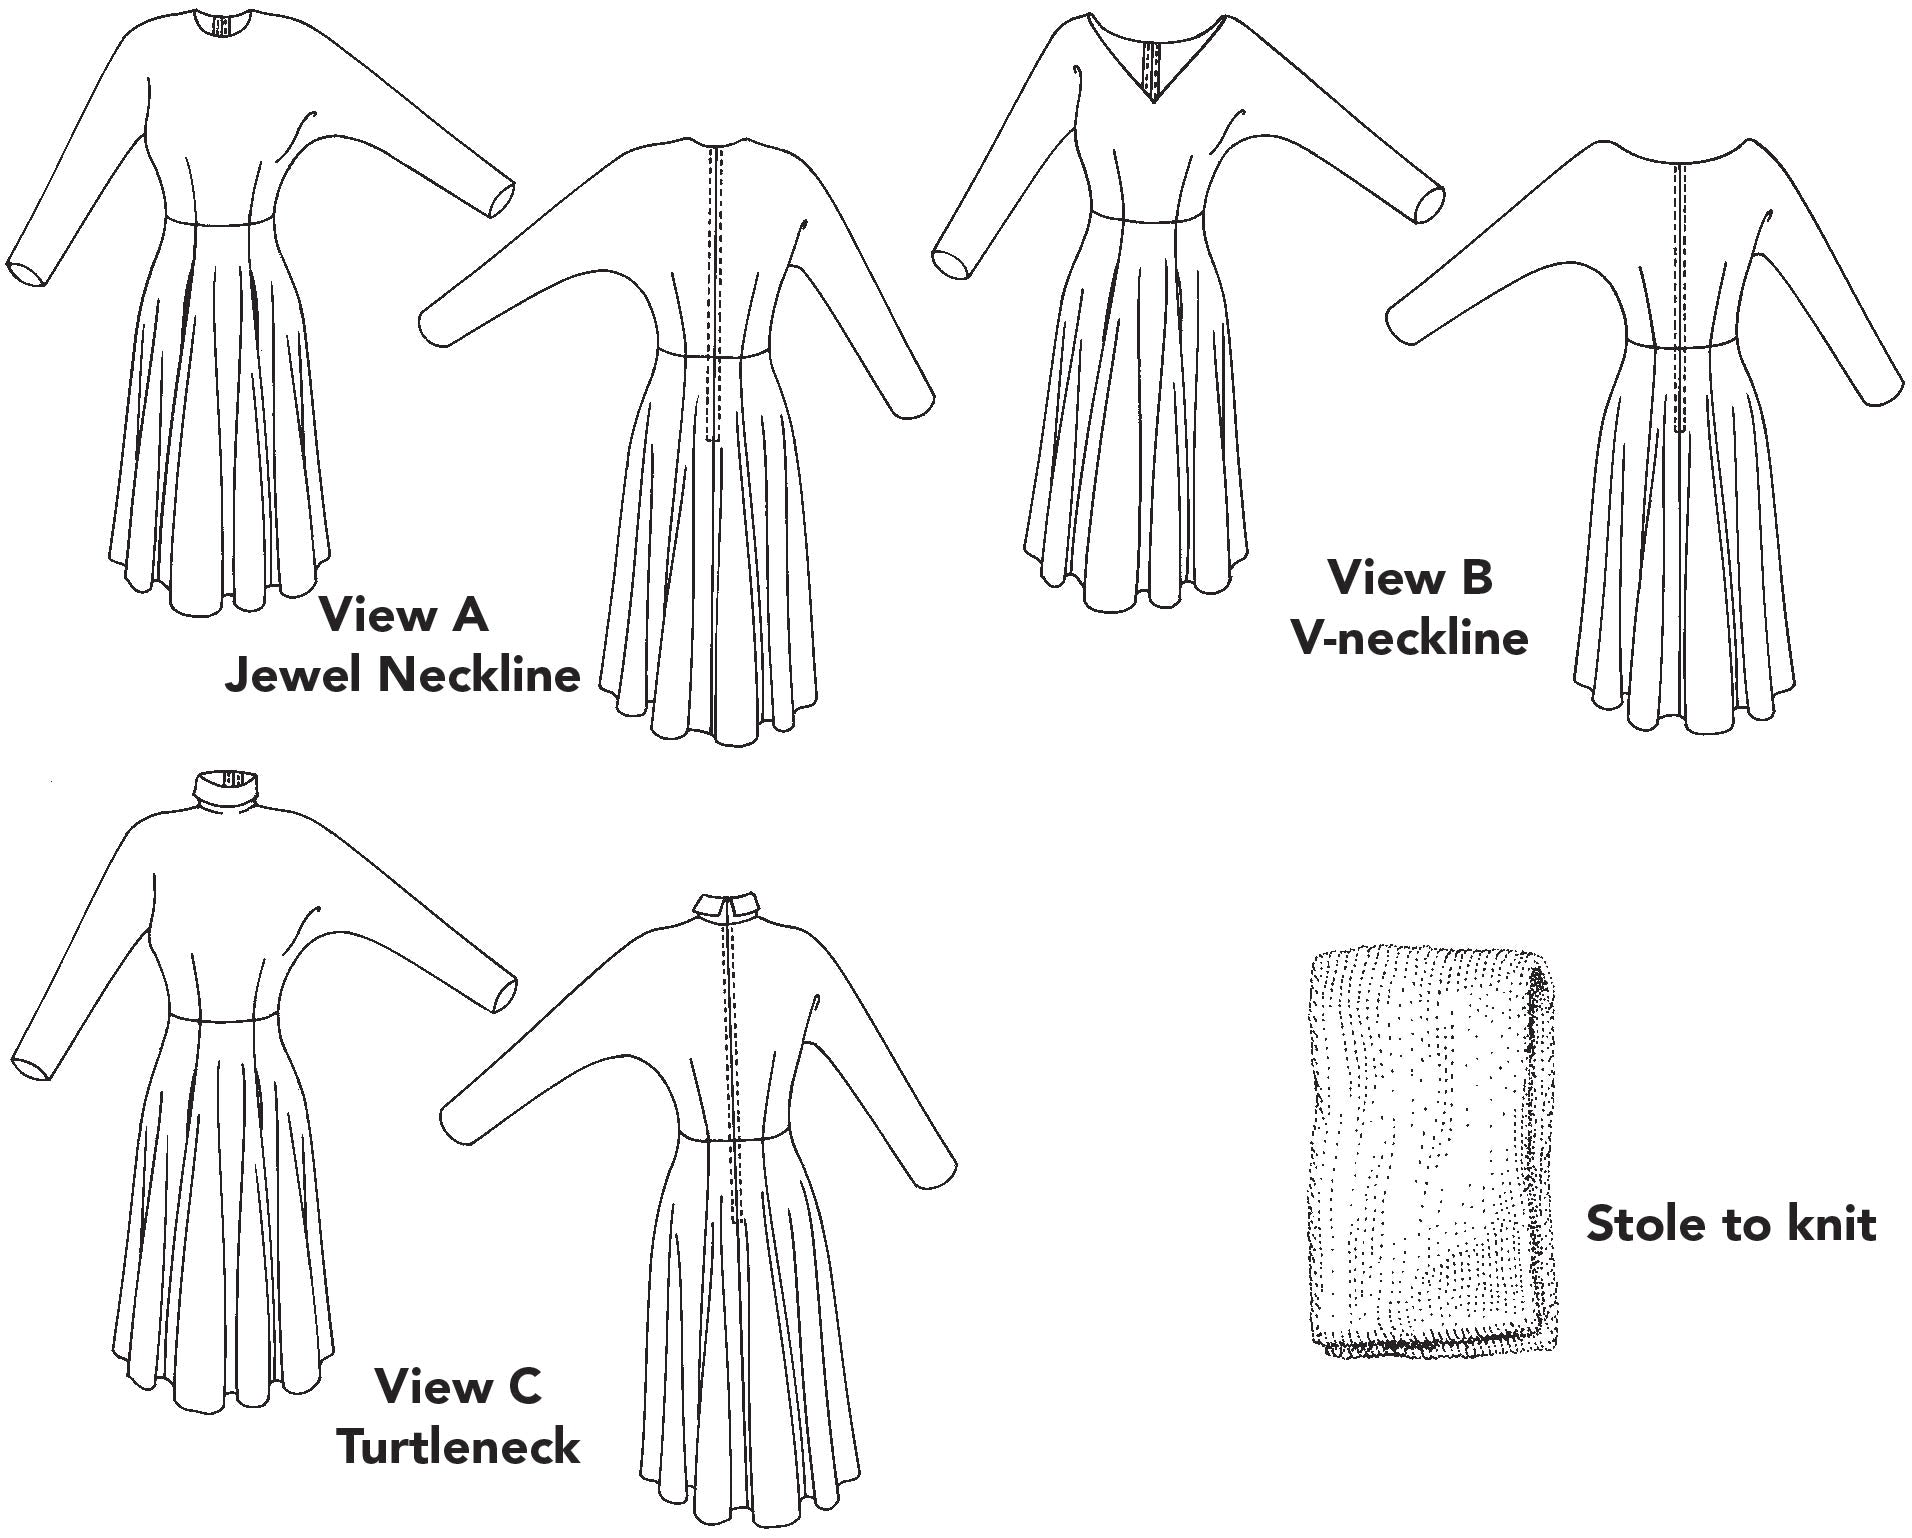 flat lays of front and back of each view of this dress with three neckline options and a stole to knit.